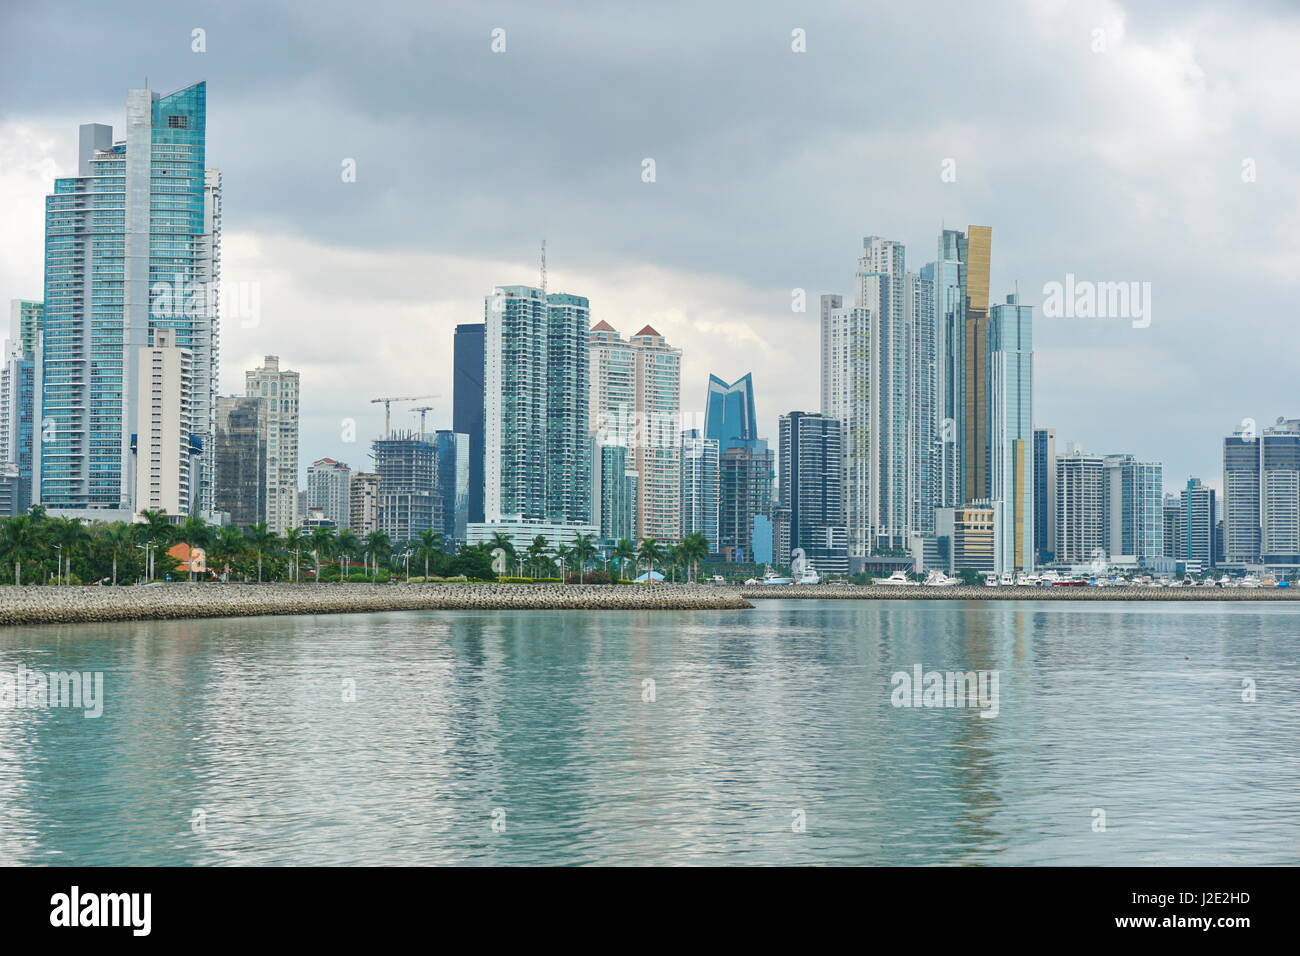 Coastline of Panama City with buildings on the oceanfront, Pacific coast of Panama, Central America Stock Photo